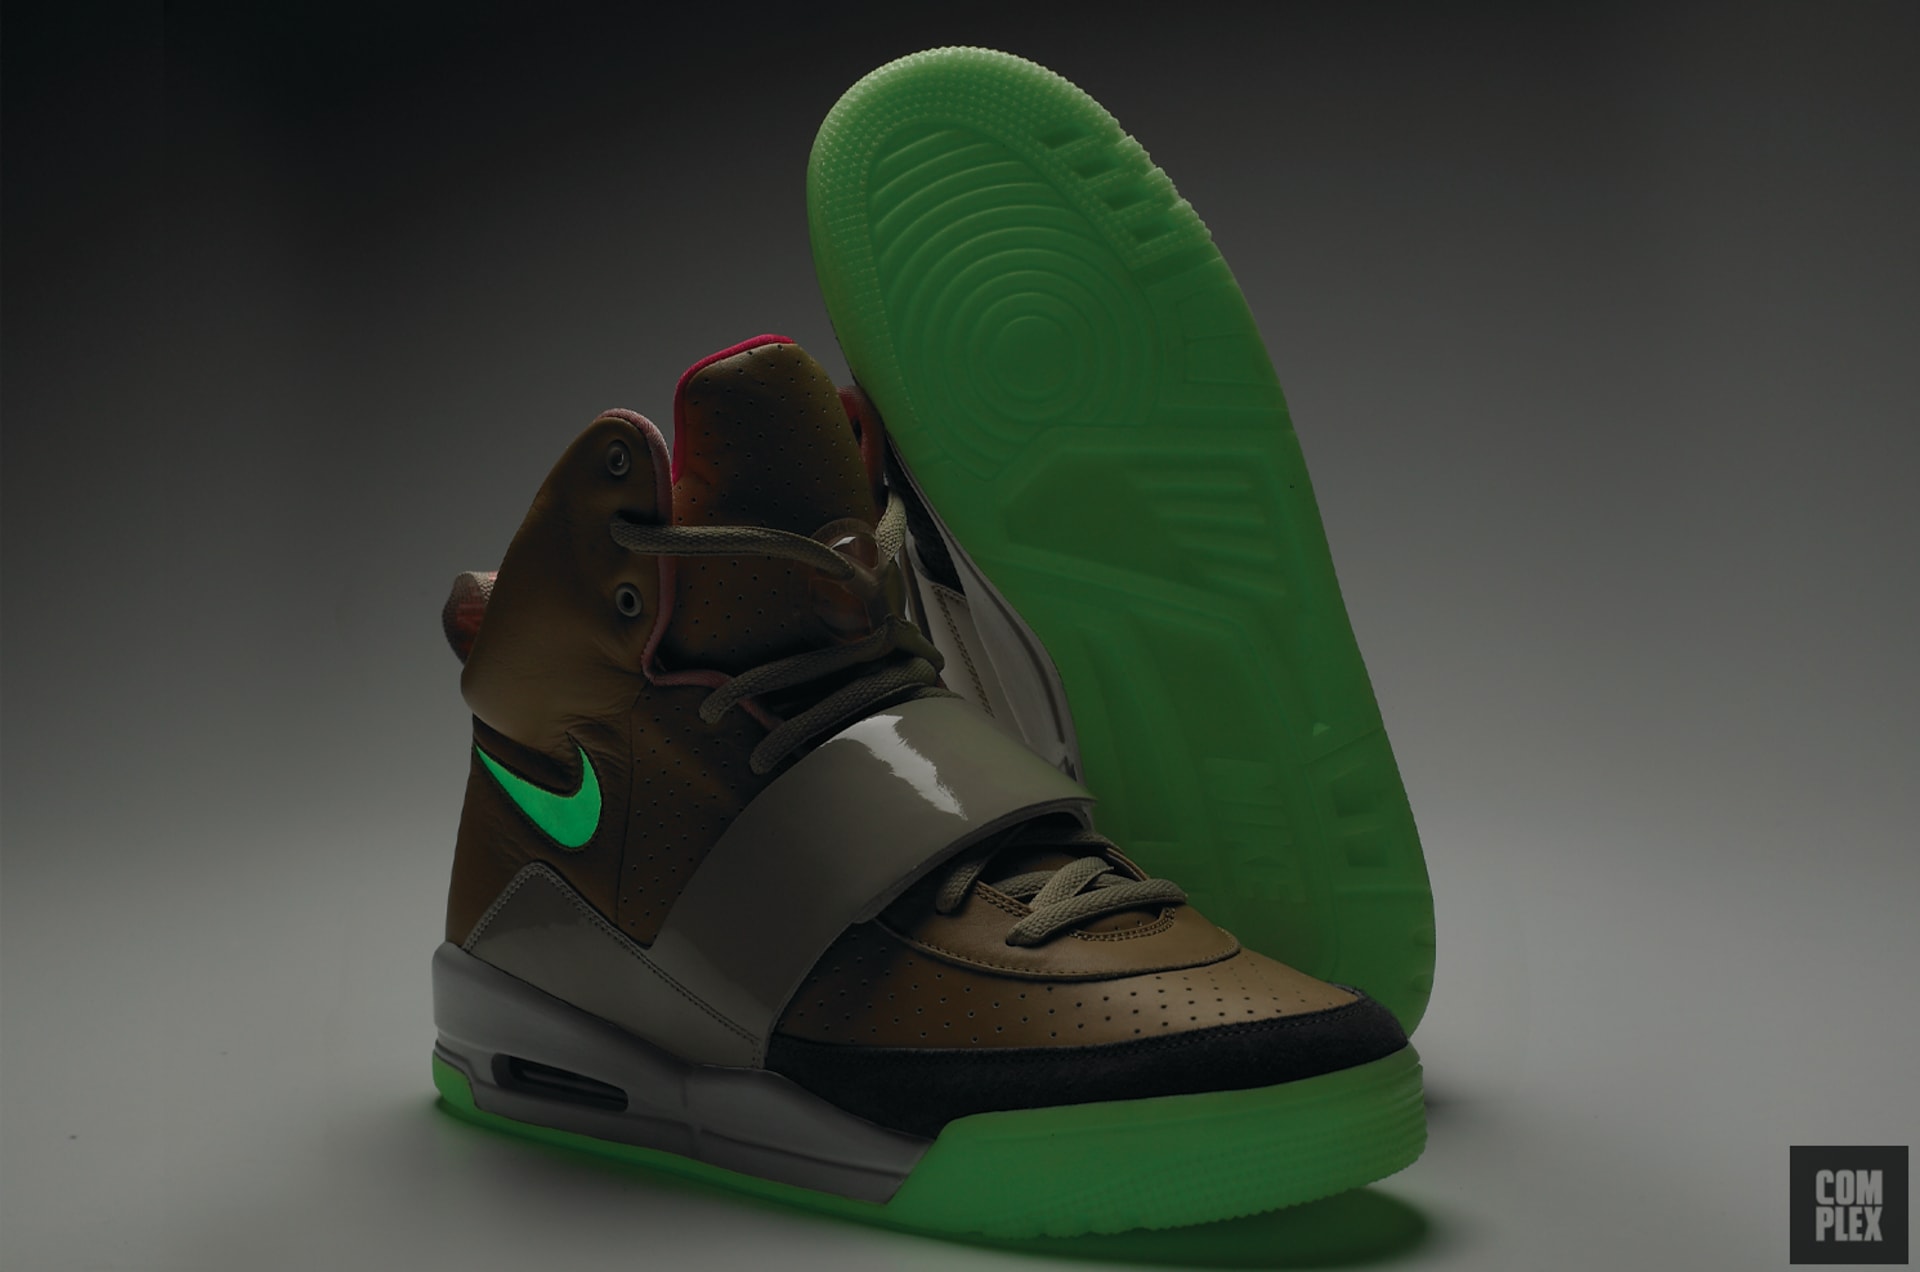 Air Yeezy Has Arrived: A Kanye West and Nike Complex